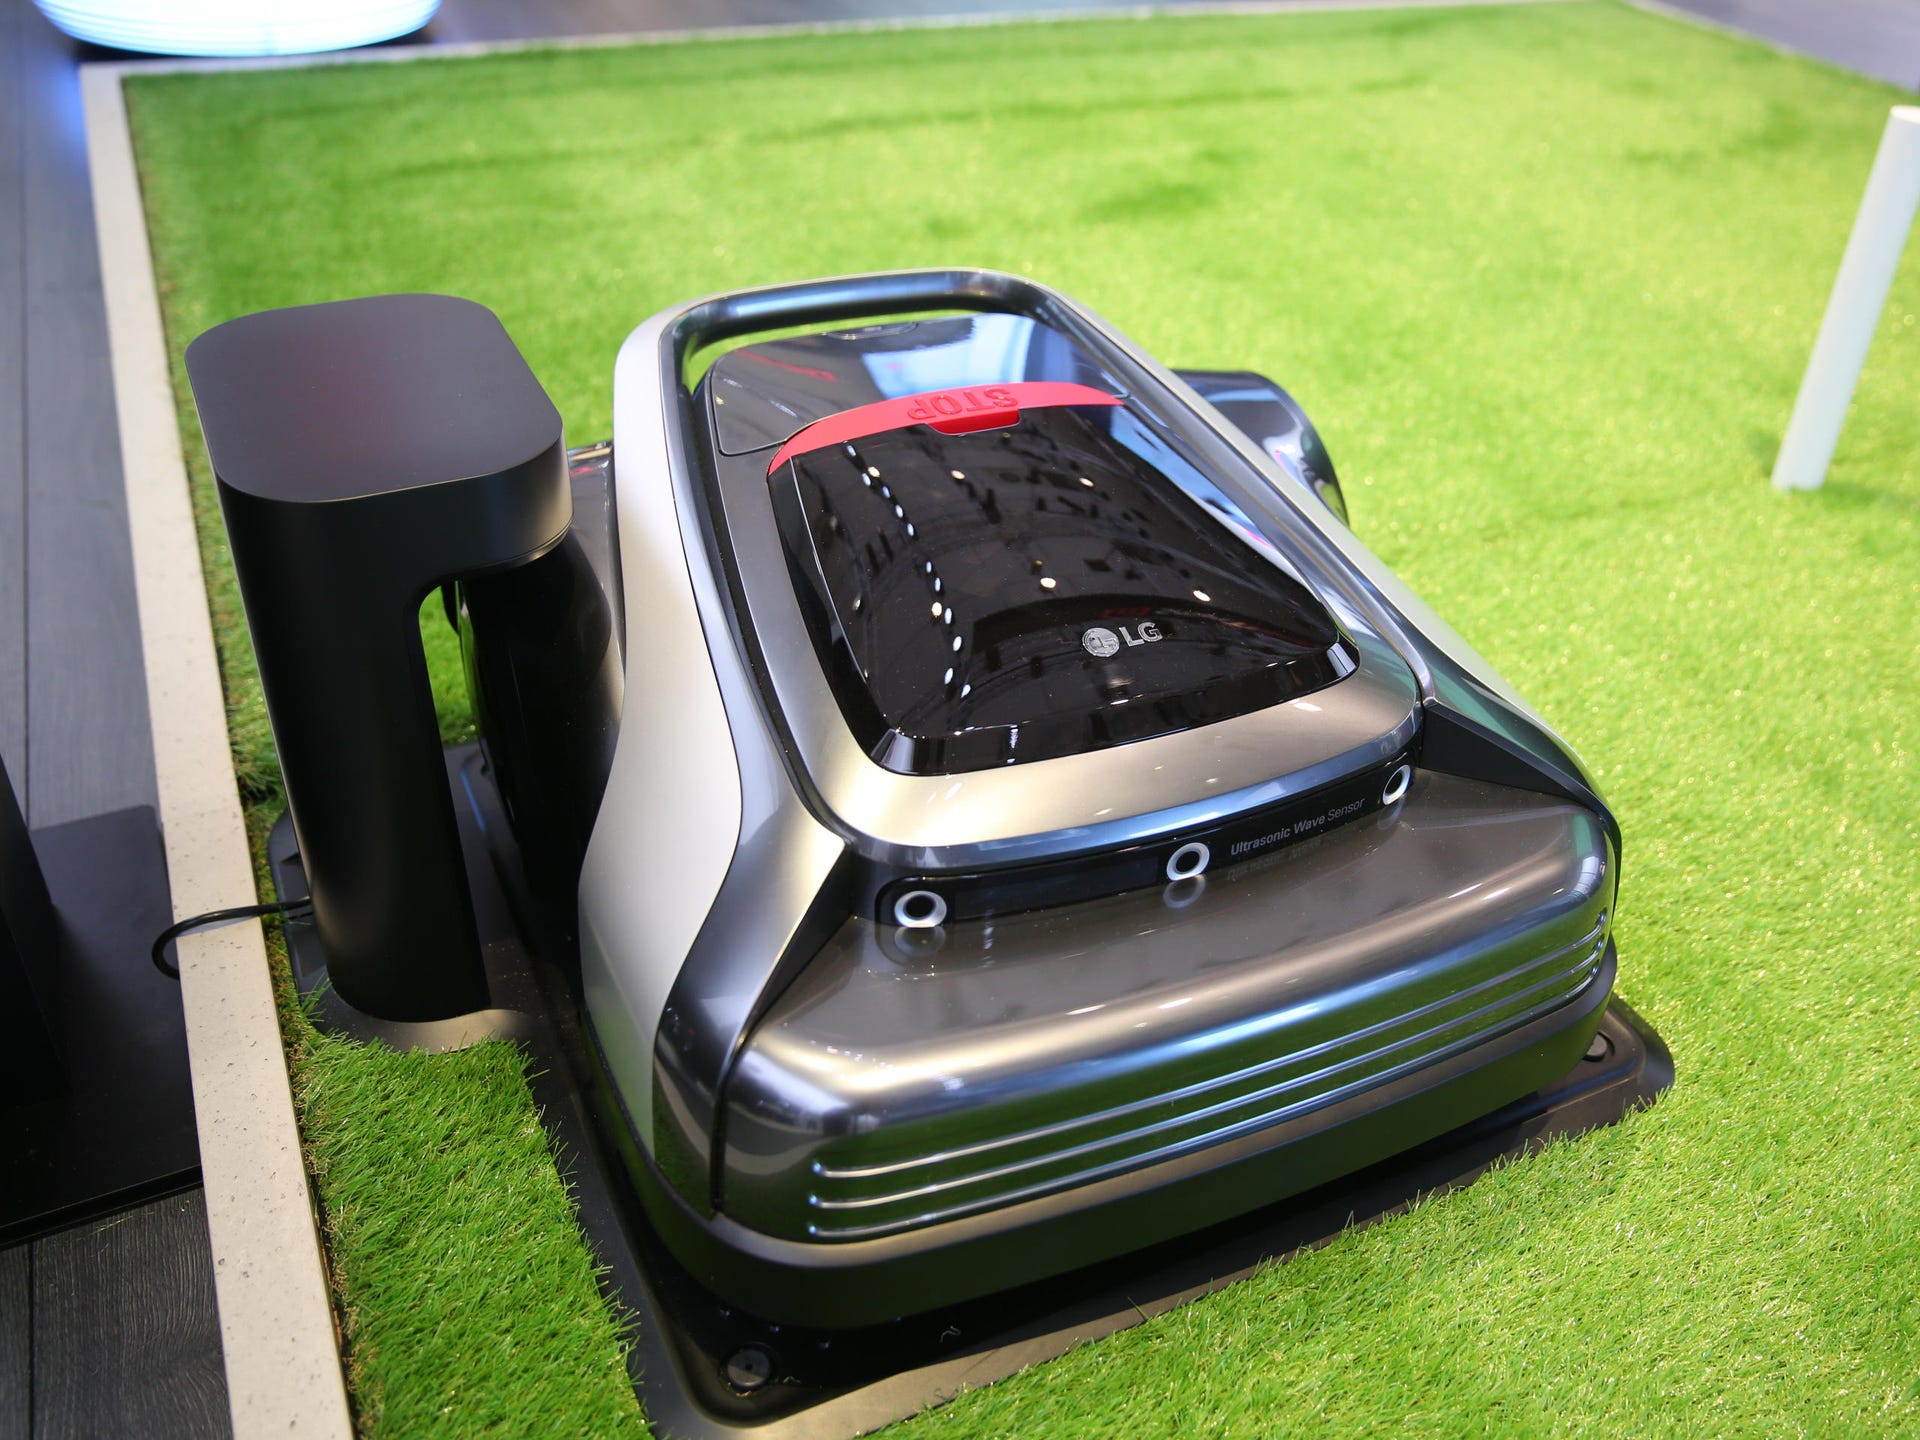 lg-lawn-mower-robot-product-photos-9